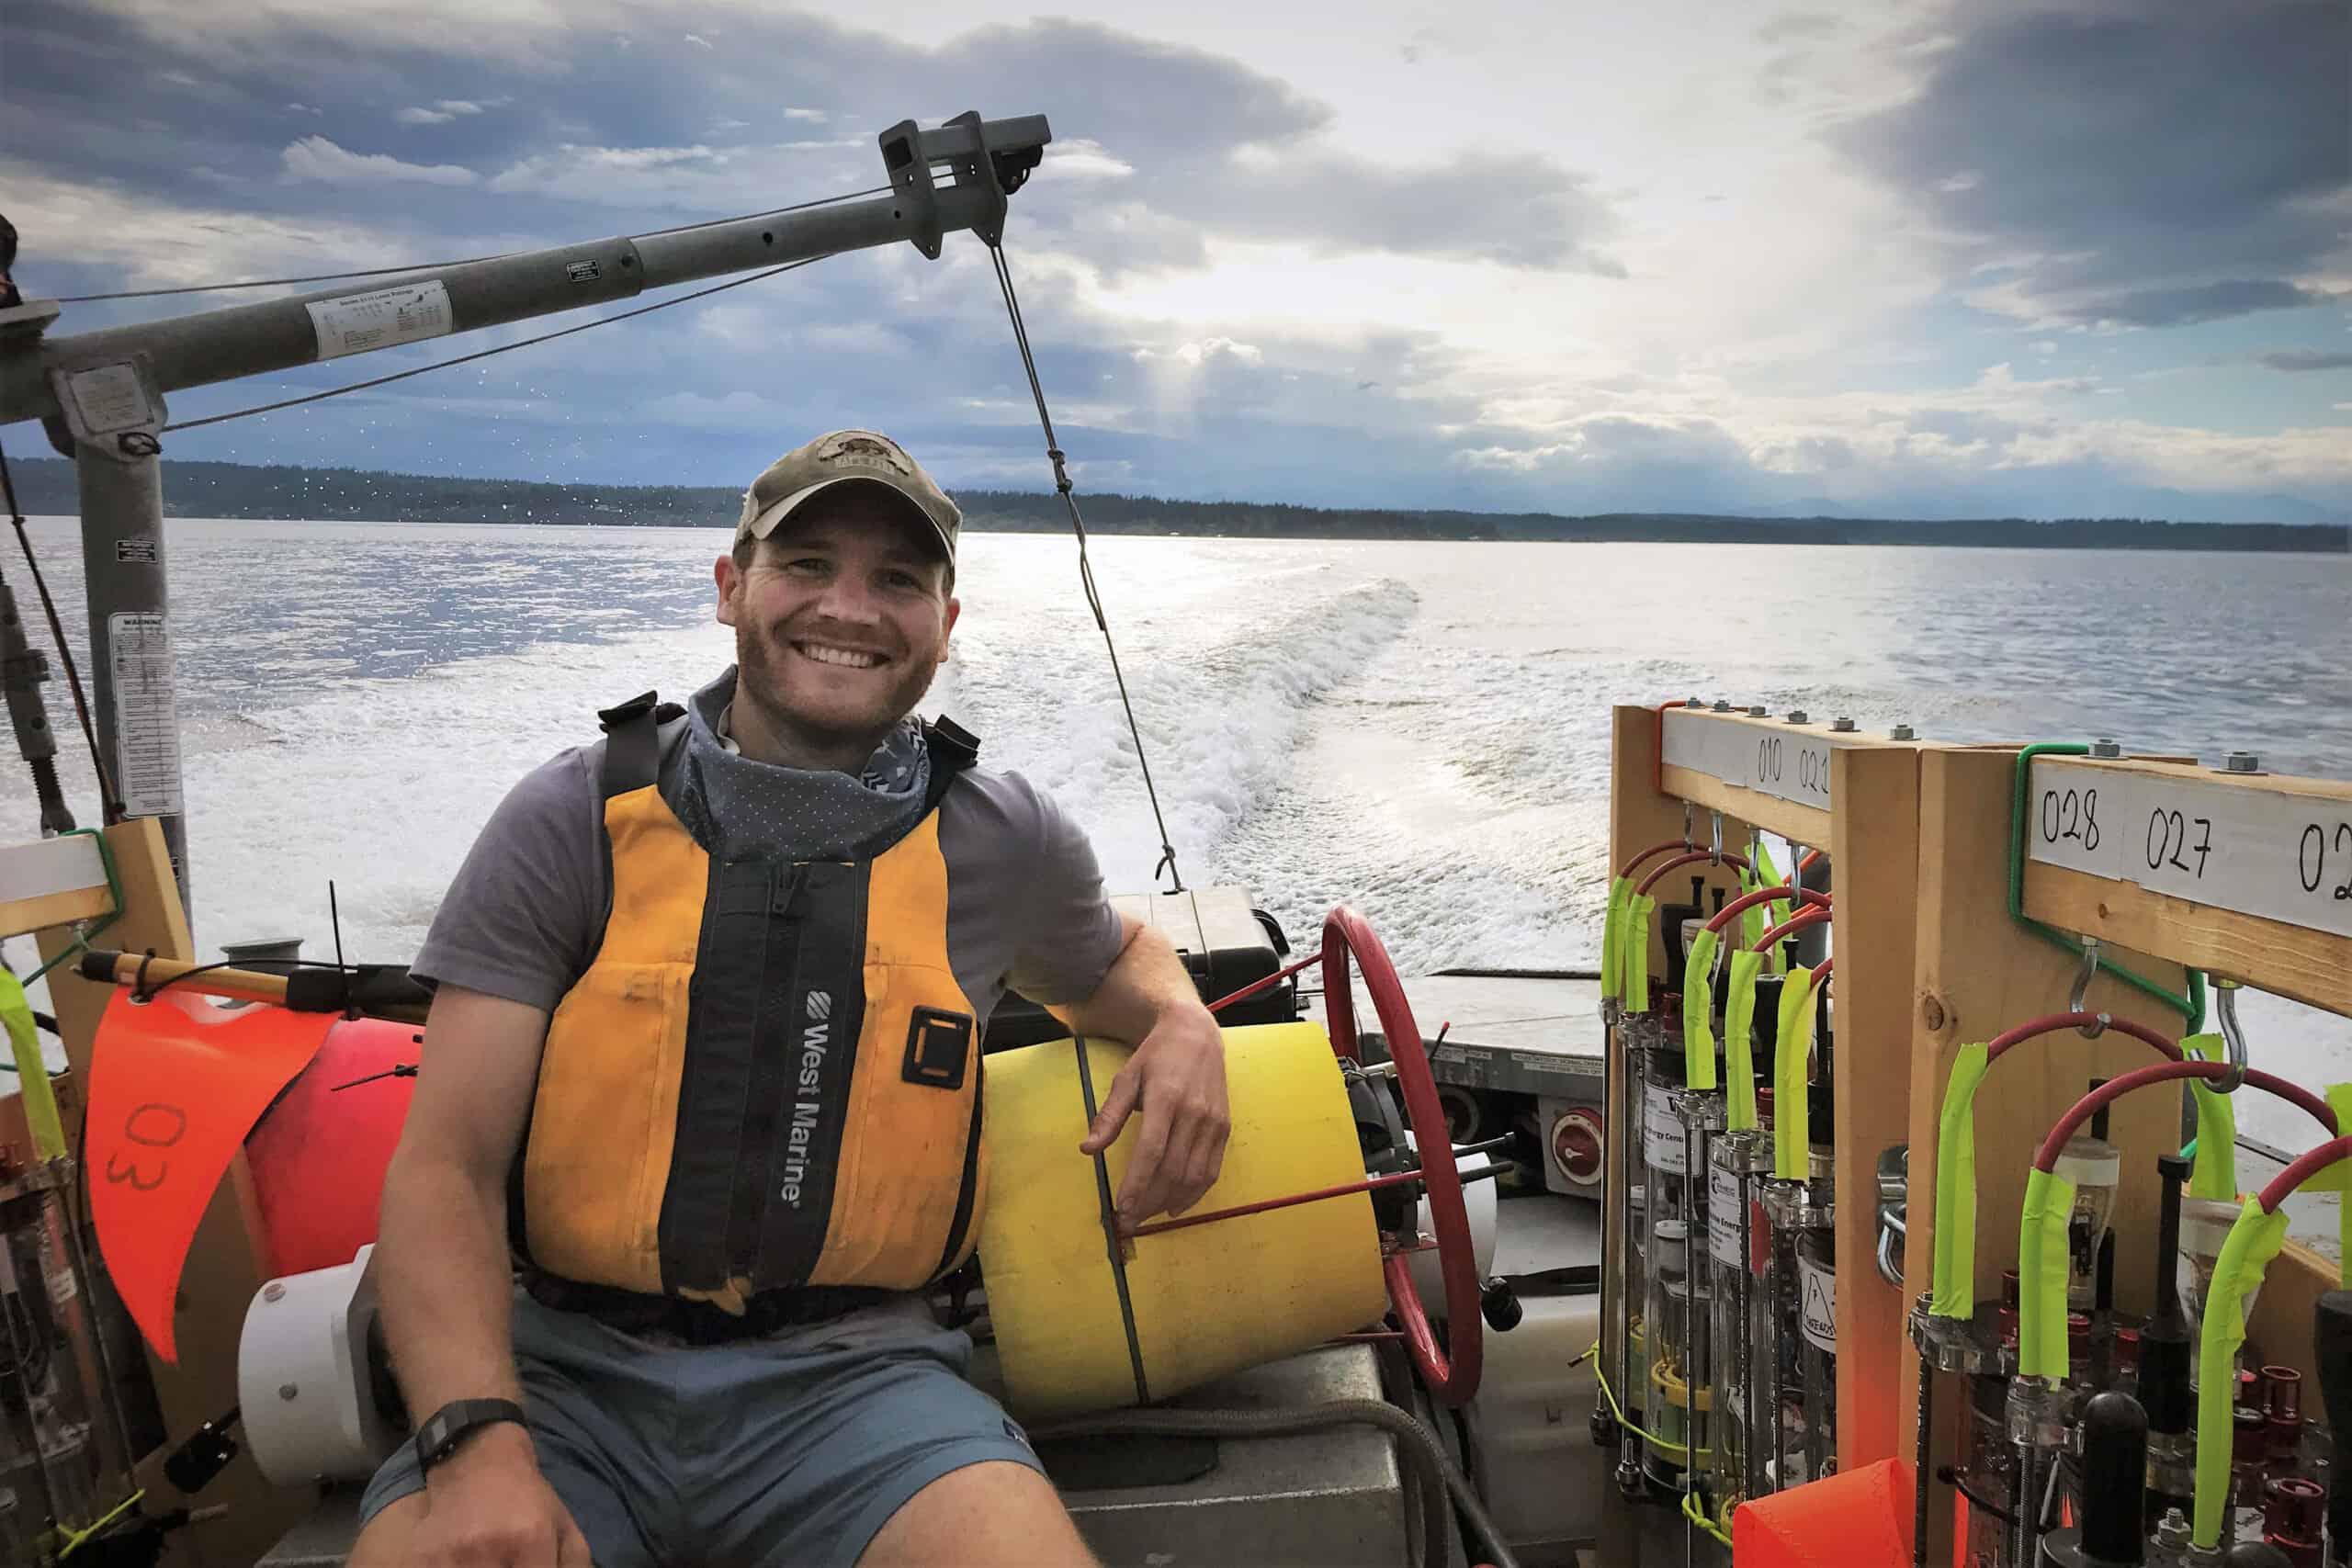 A happy return from Agate Pass, WA after a successful field deployment of the microFloats. Photo credit: Zack Tully